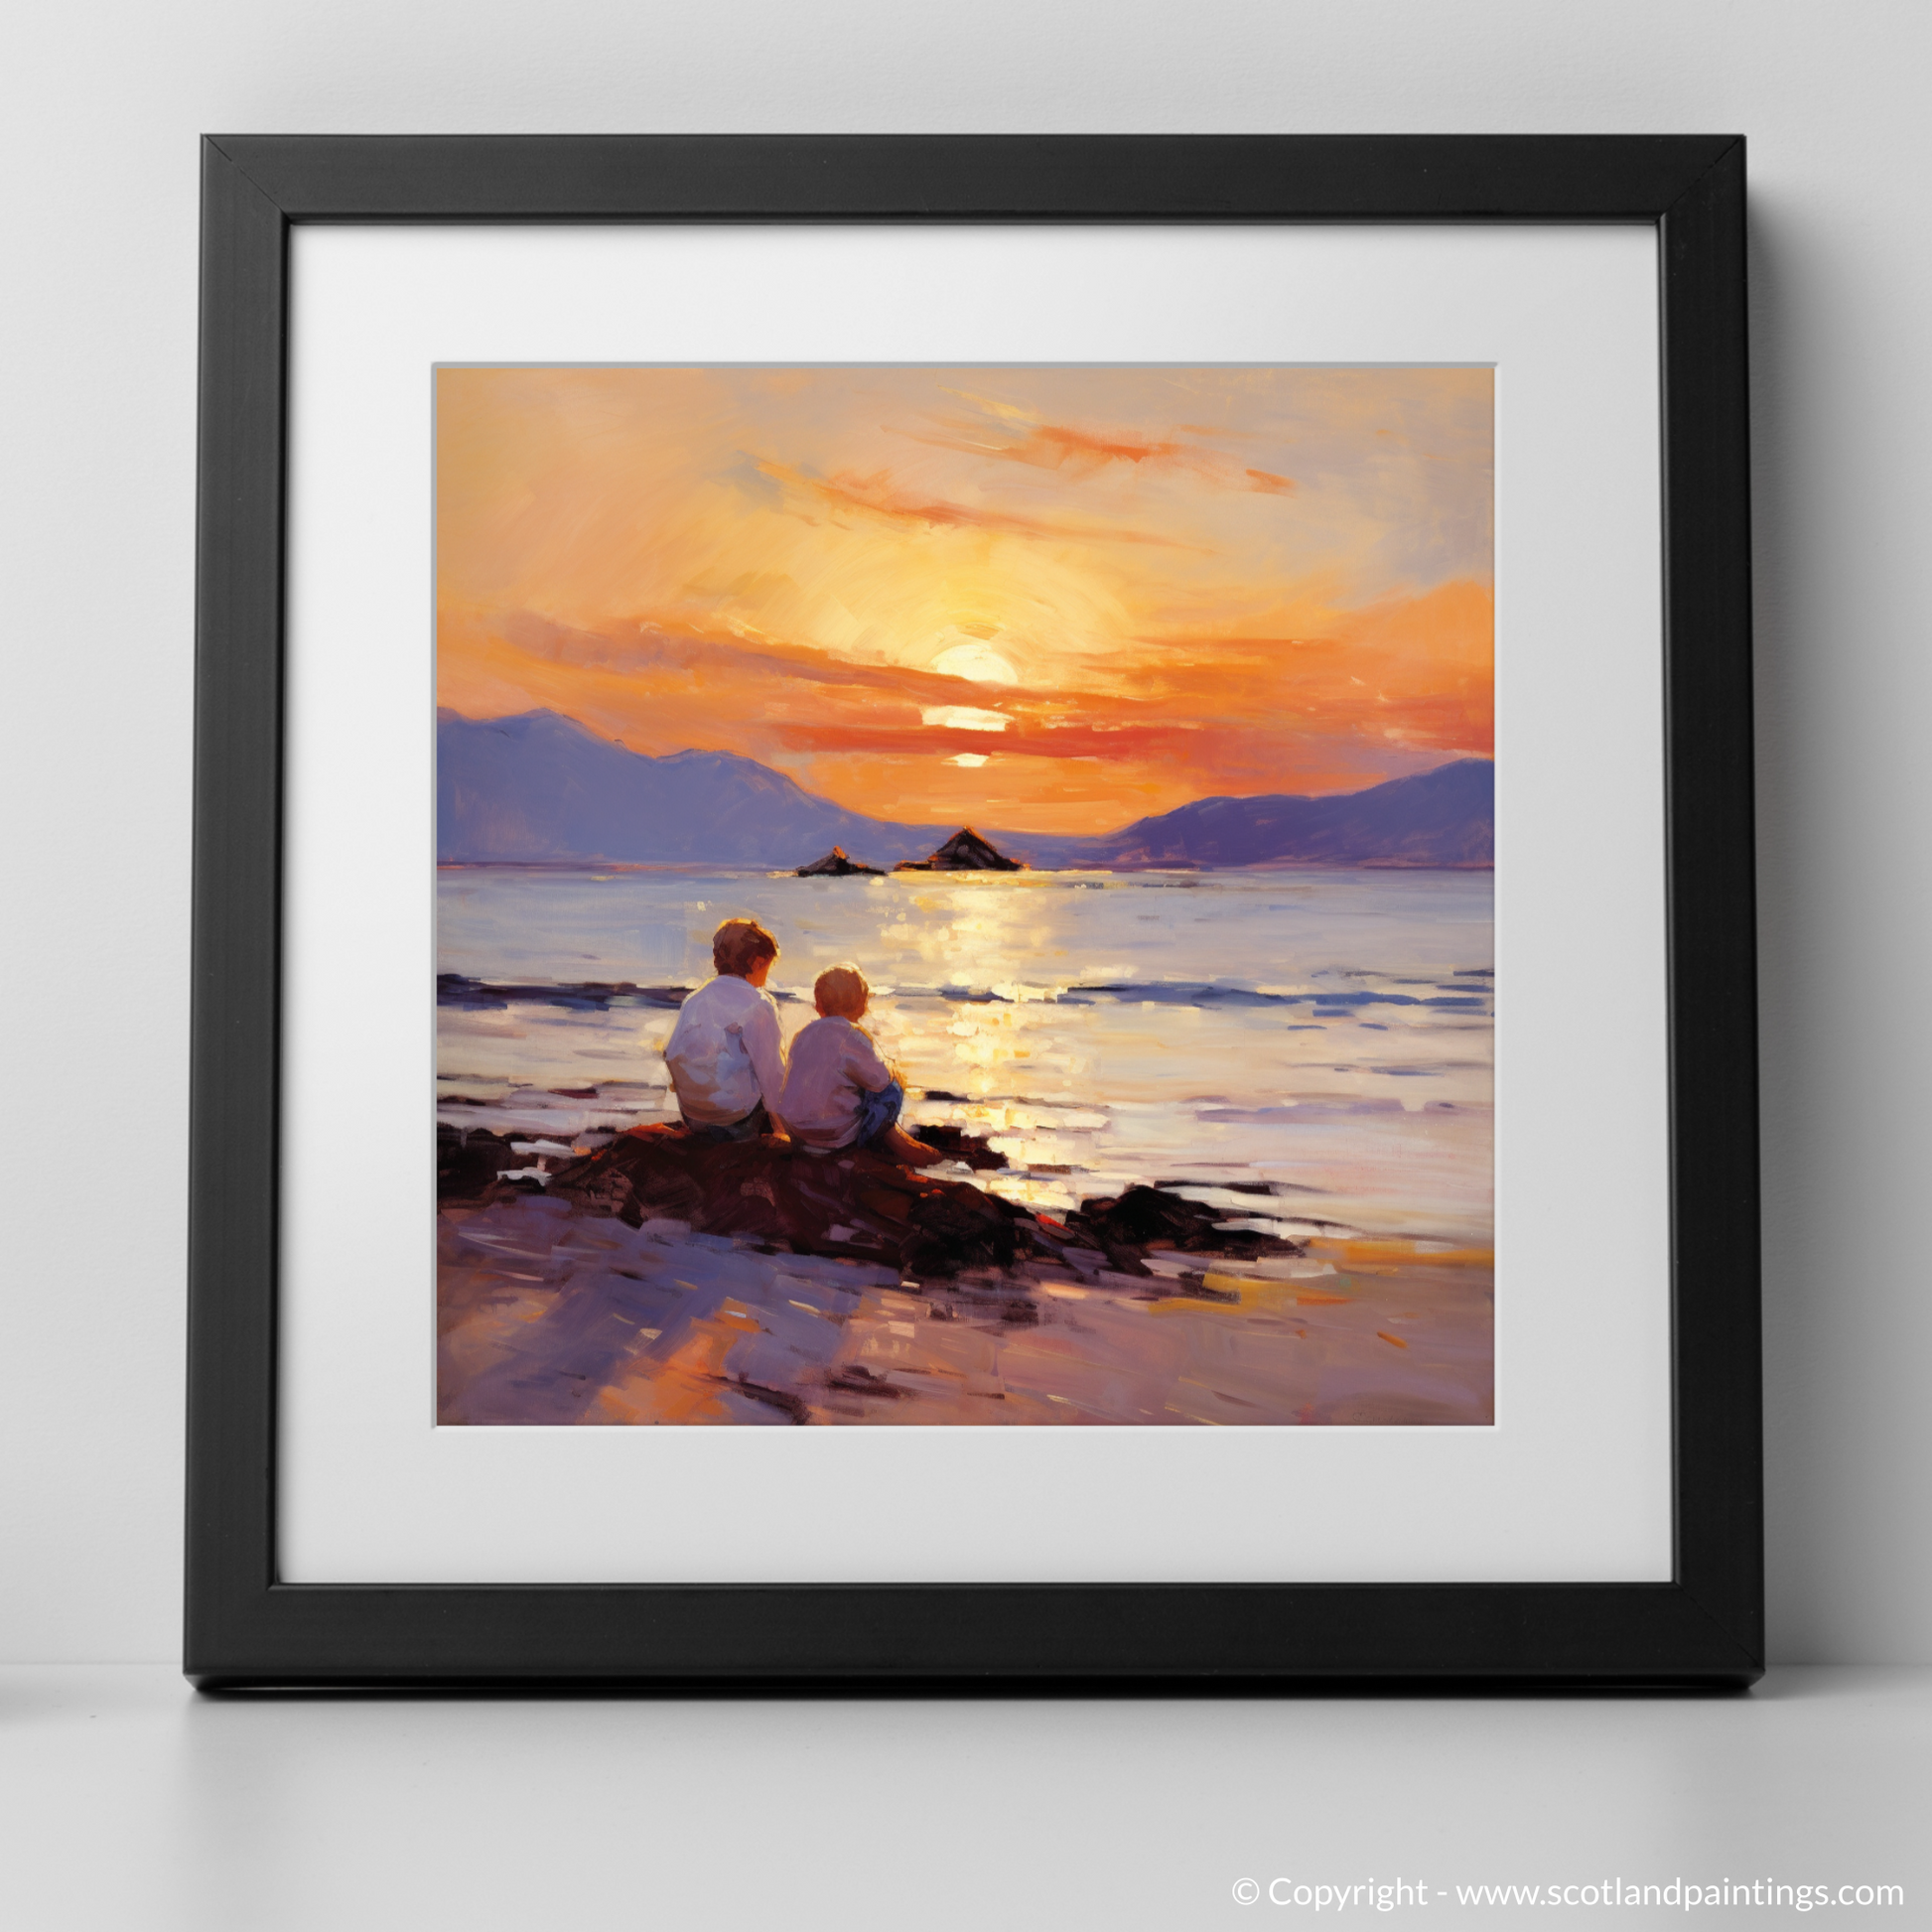 Art Print of Young explorers watching the sunset over the Isle of Arran from the peaceful Saltcoats Beach with a black frame